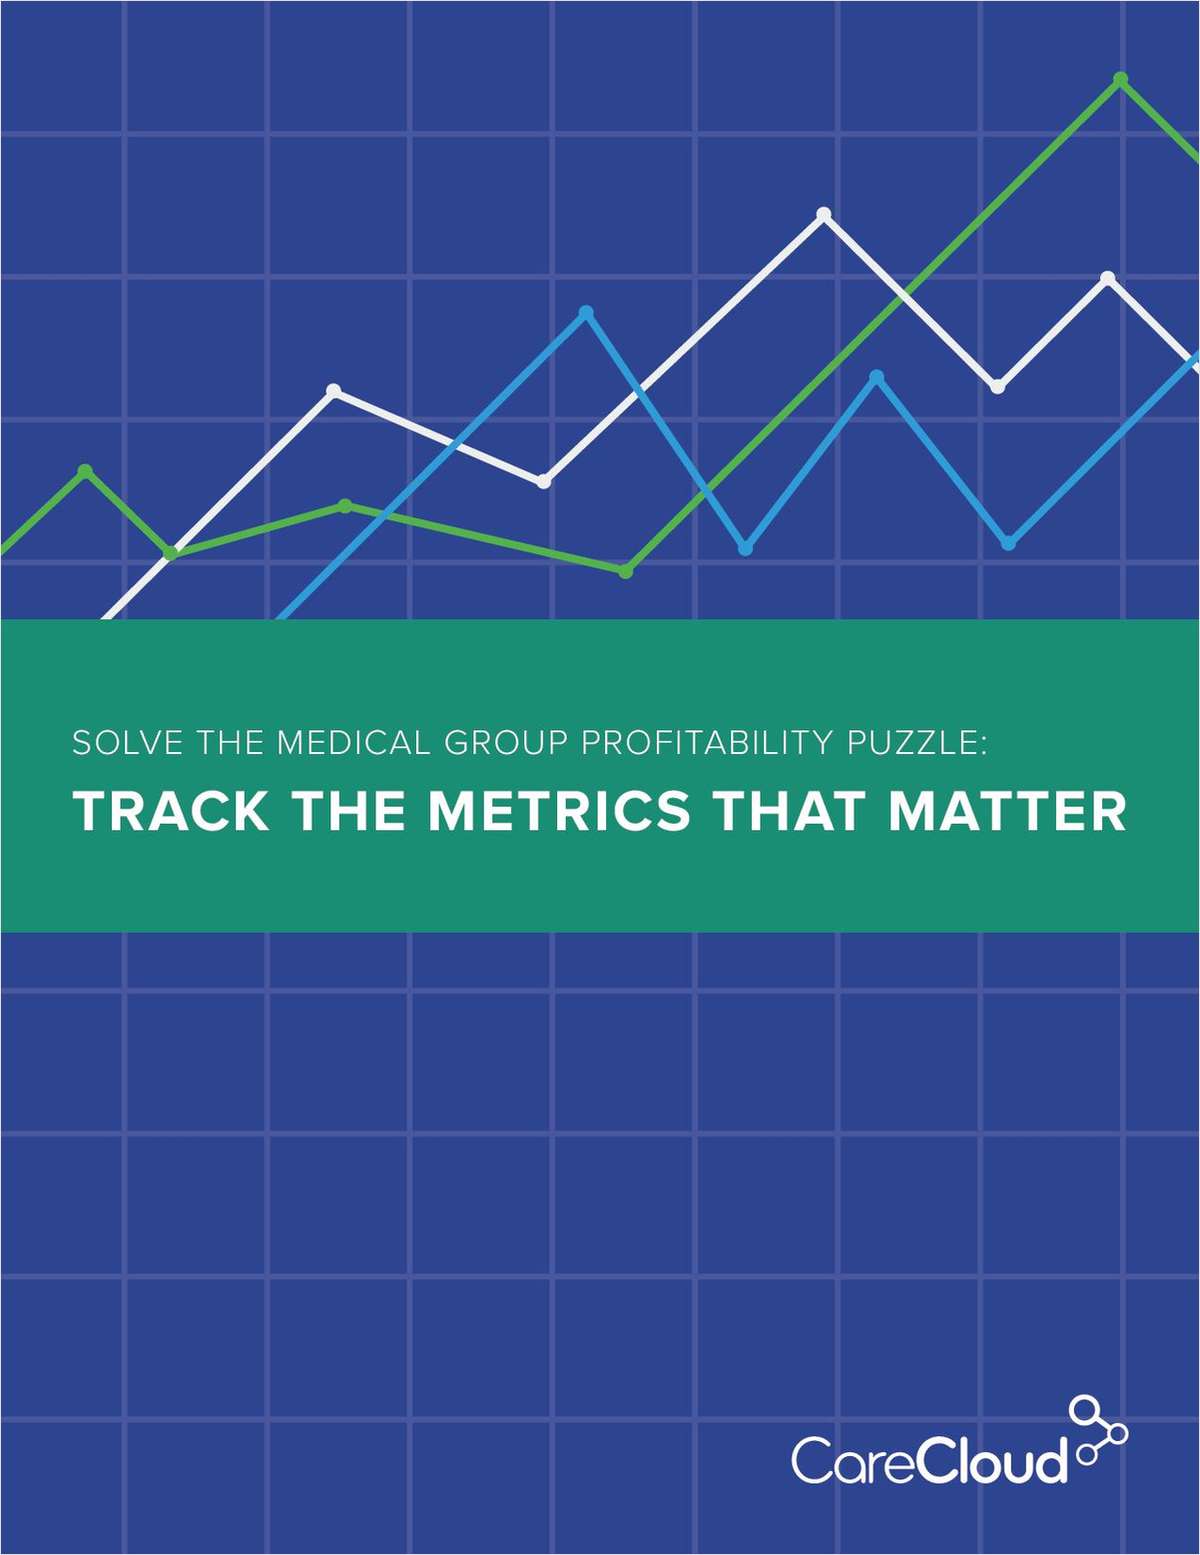 Solve the Medical Group Profitability Puzzle: Track the Metrics That Matter